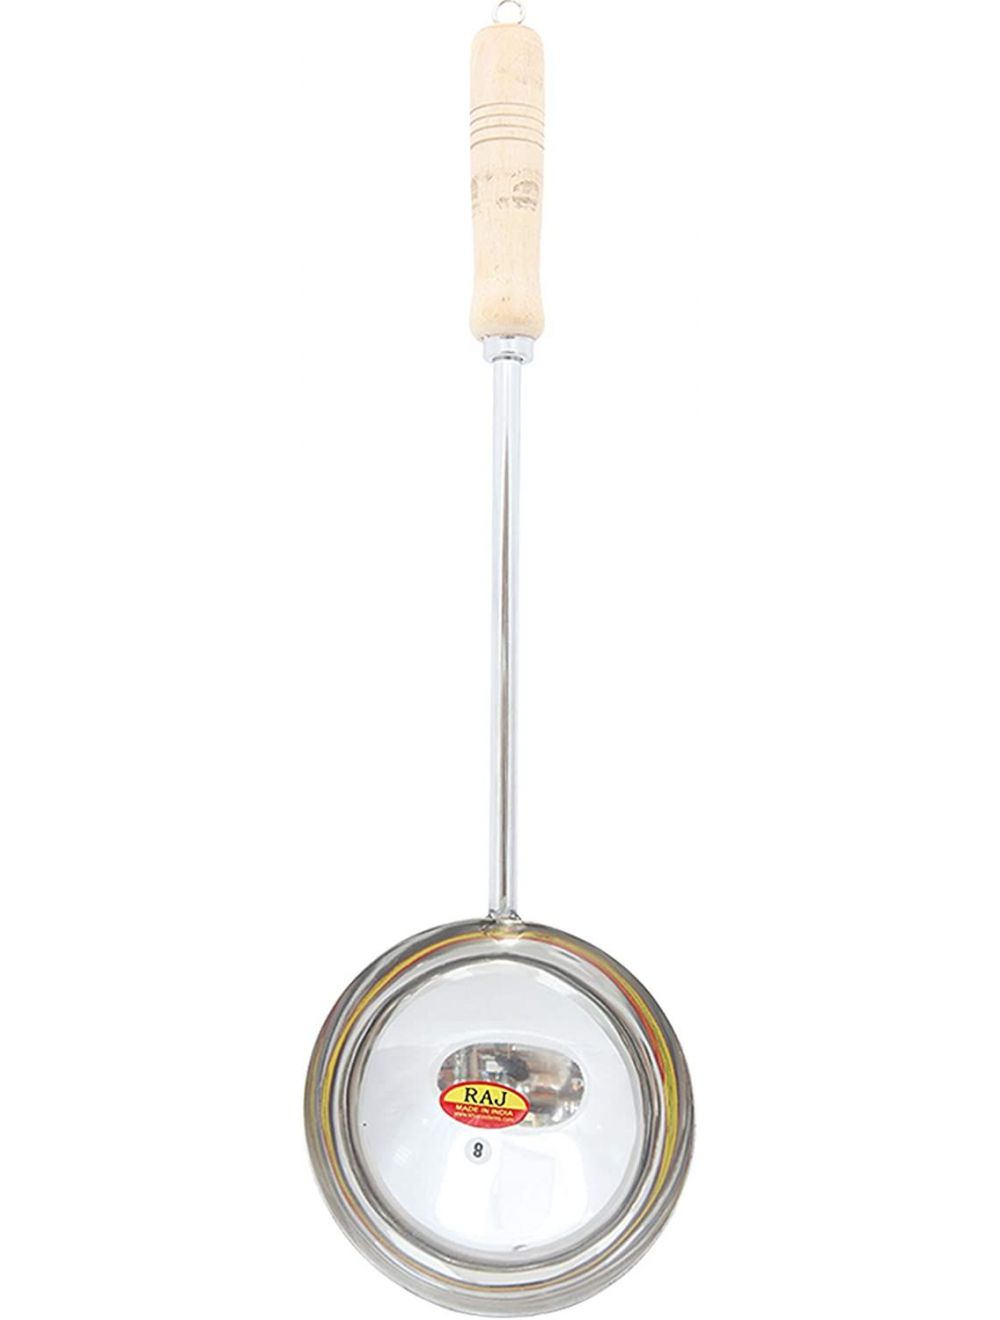 Raj Steel Ladle With Wooden Handle, Silver, 58 cm, RUL009